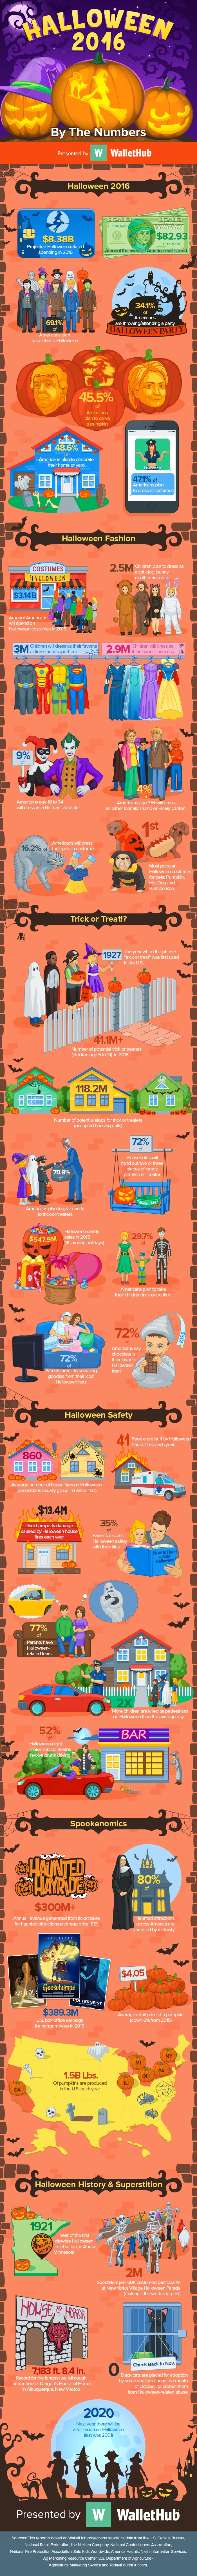 Halloween 2016 By The Numbers